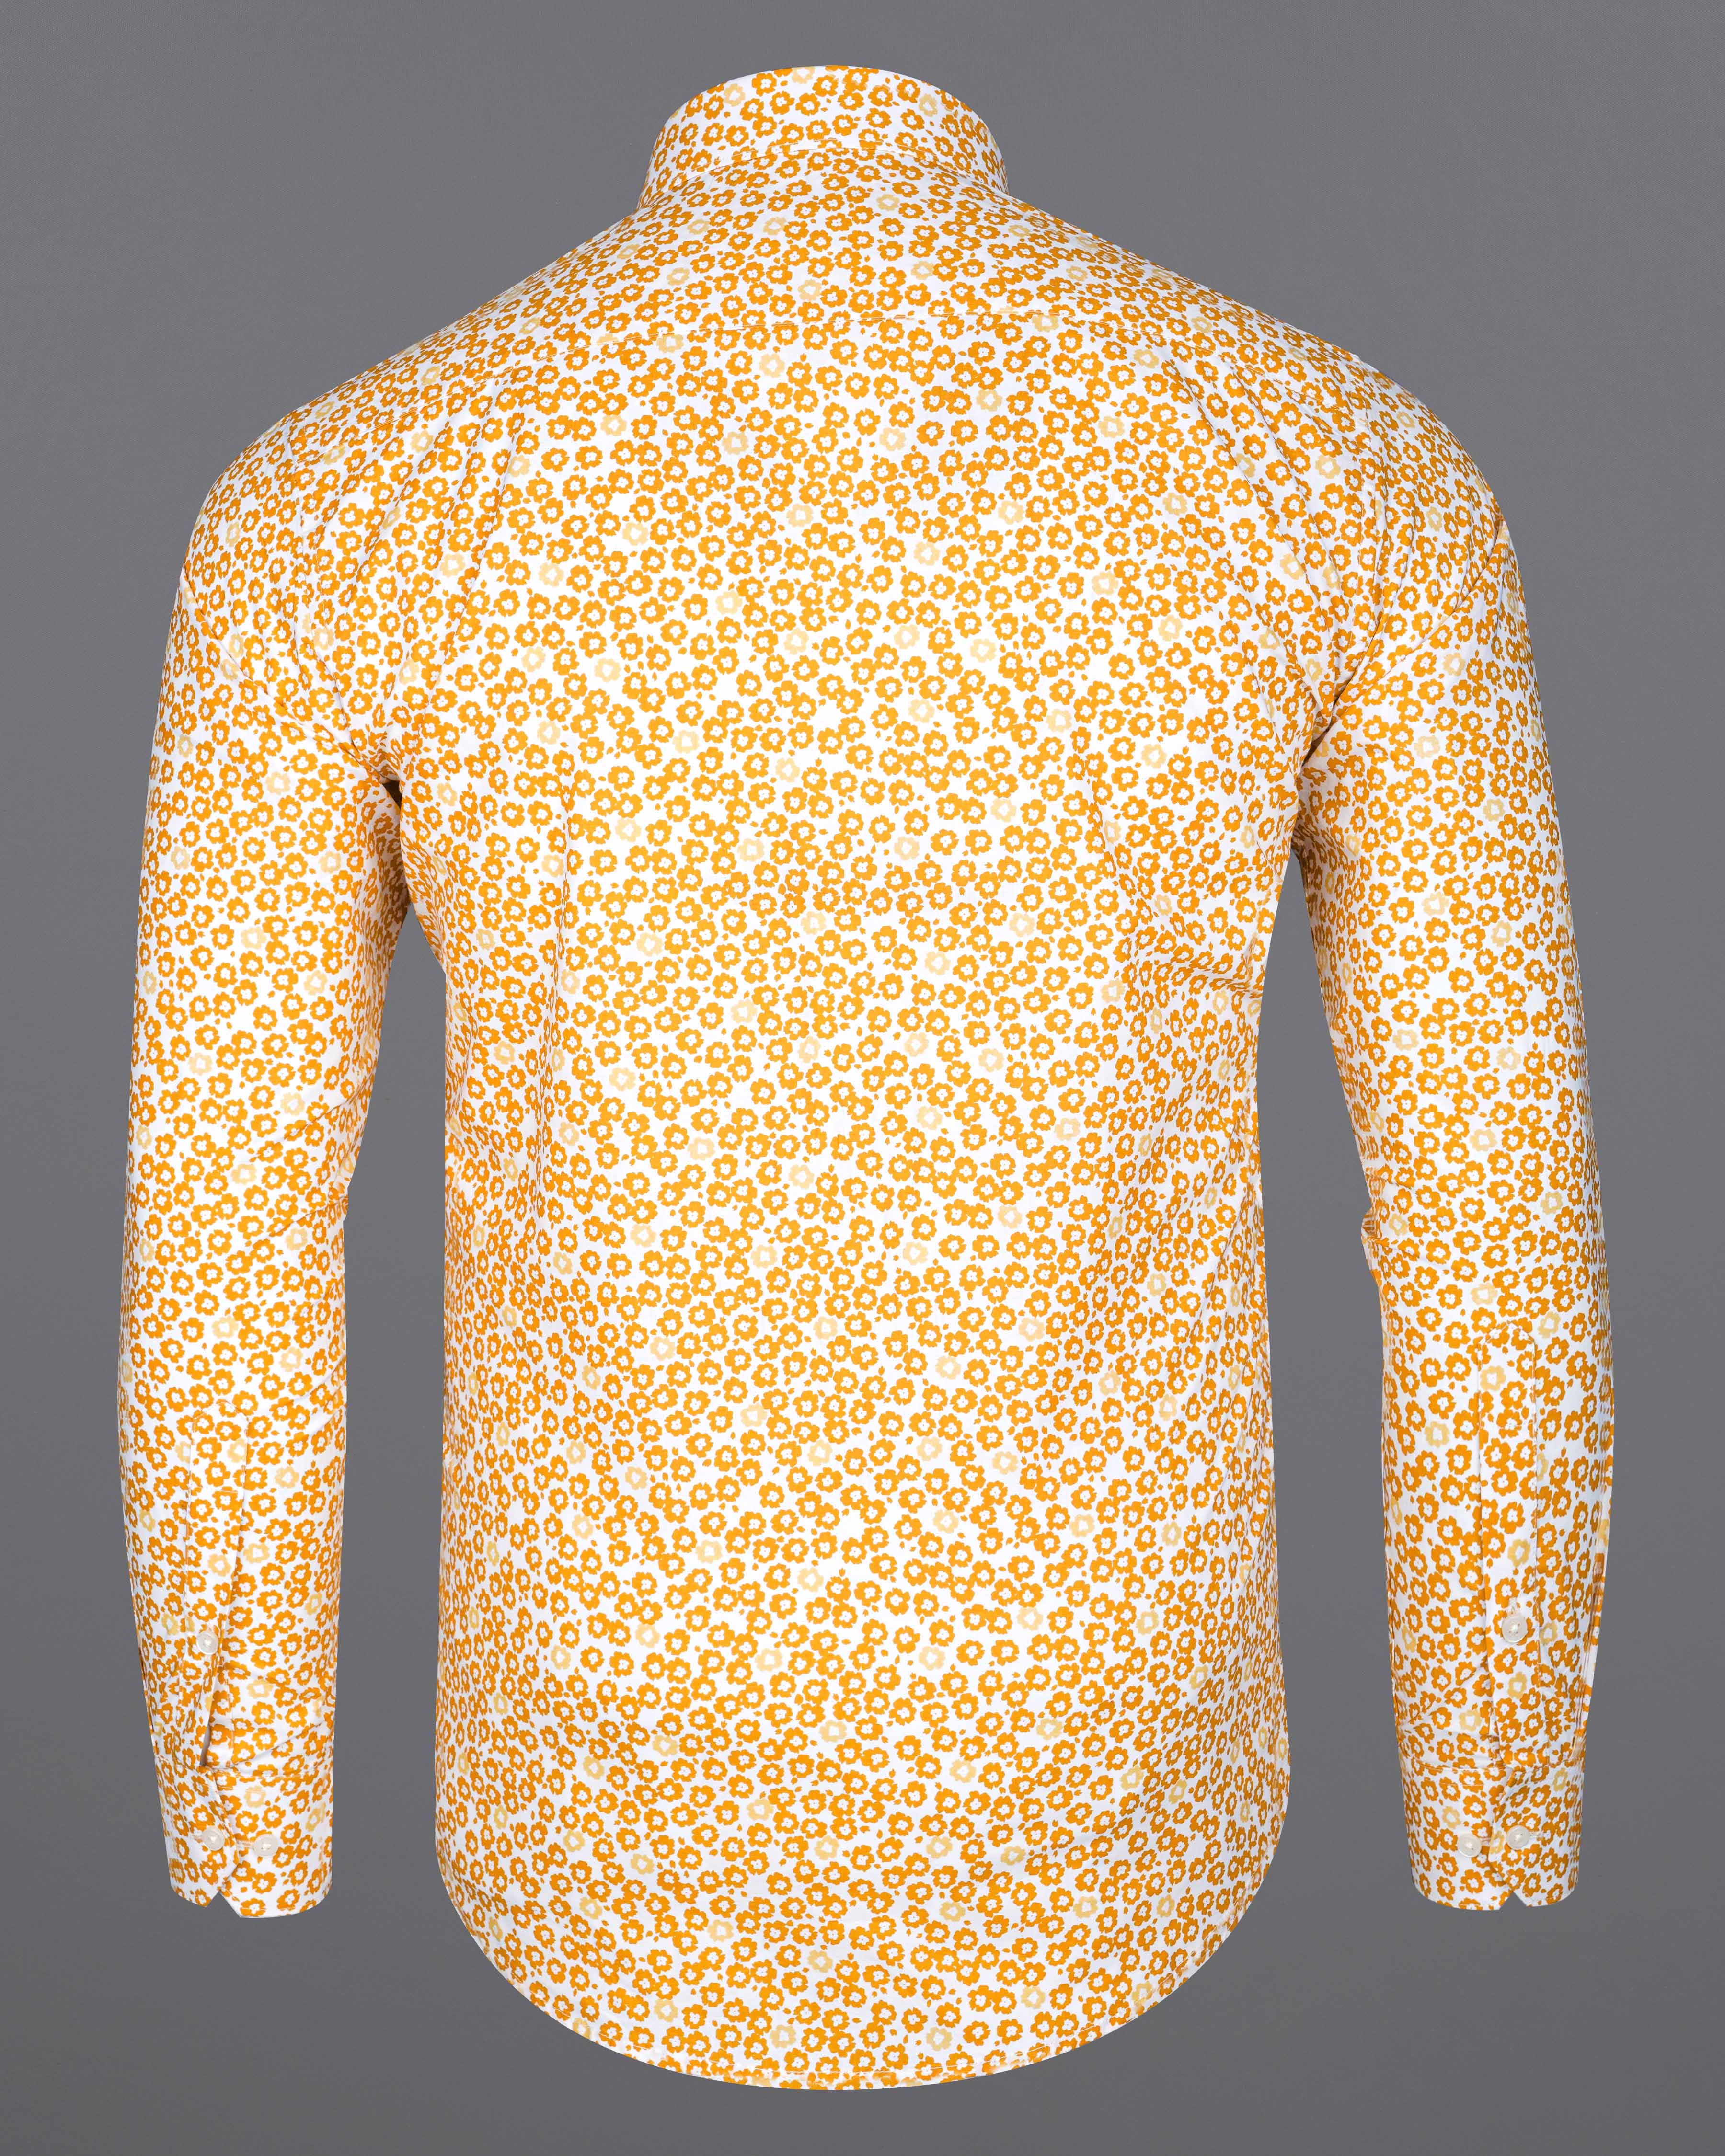 Cantaloupe Yellow with White Ditsy Printed Premium Cotton Shirt 8239-38,8239-H-38,8239-39,8239-H-39,8239-40,8239-H-40,8239-42,8239-H-42,8239-44,8239-H-44,8239-46,8239-H-46,8239-48,8239-H-48,8239-50,8239-H-50,8239-52,8239-H-52